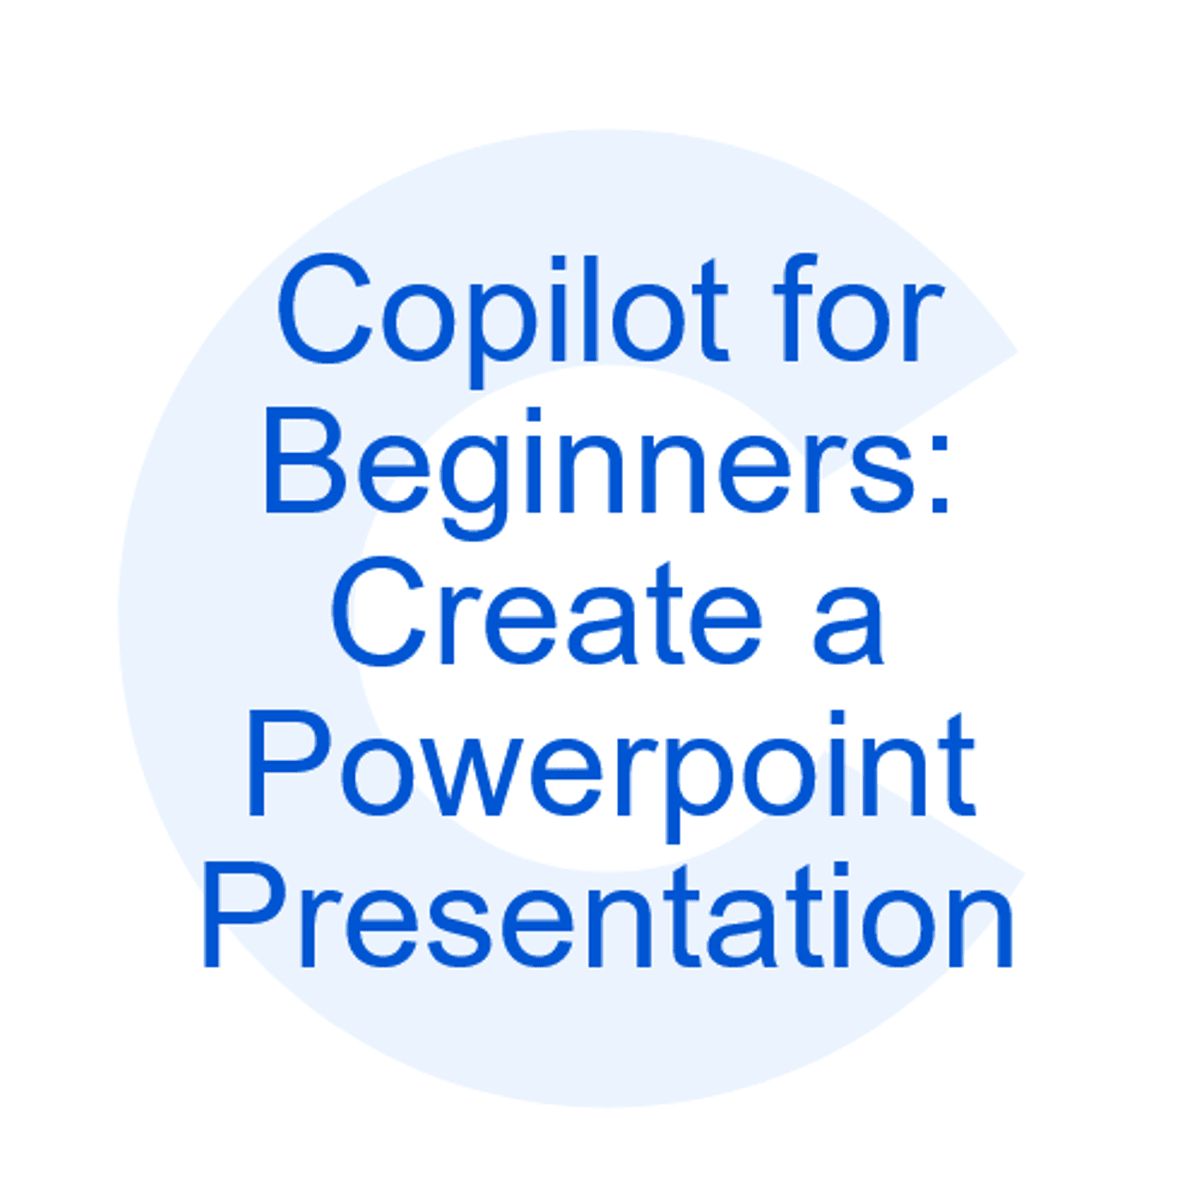 Copilot for Beginners: Create a Powerpoint Presentation